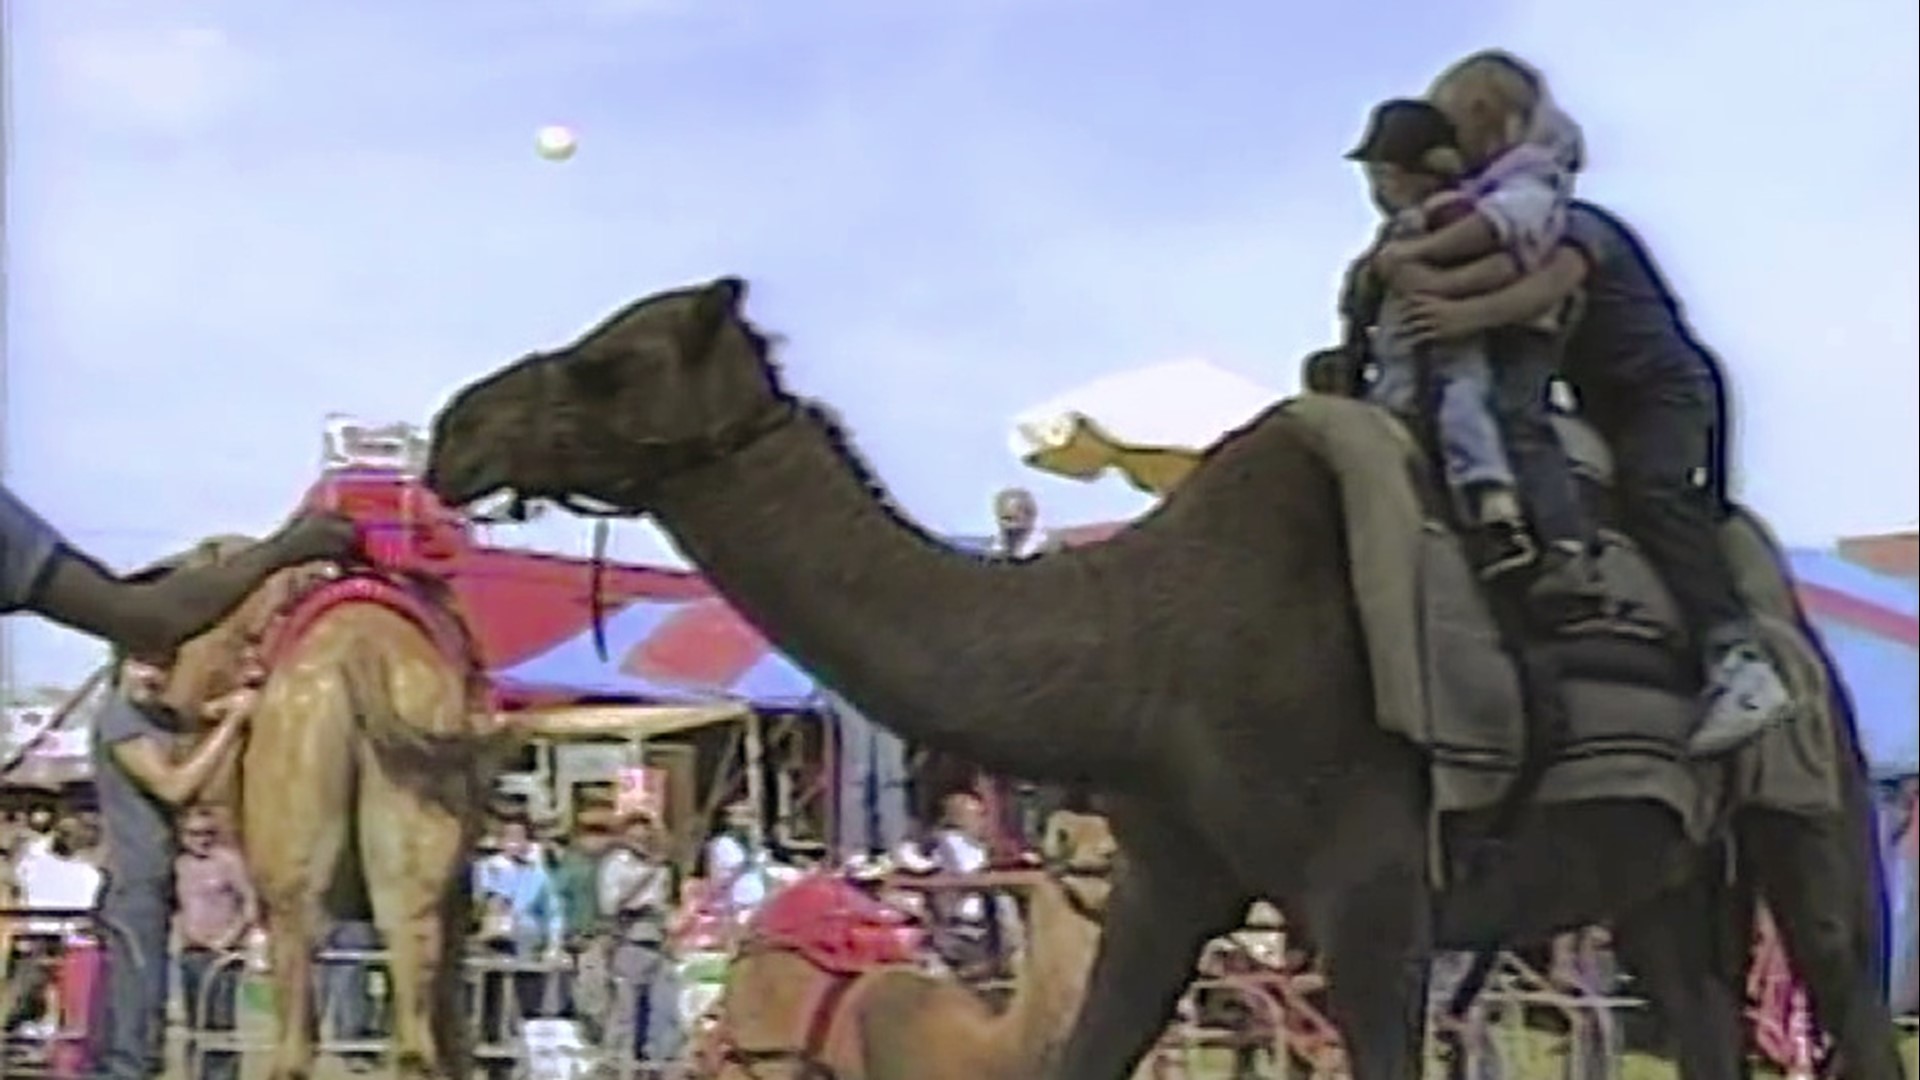 Mike Stevens found an unusual attraction at the Bloomsburg Fair in 1985.